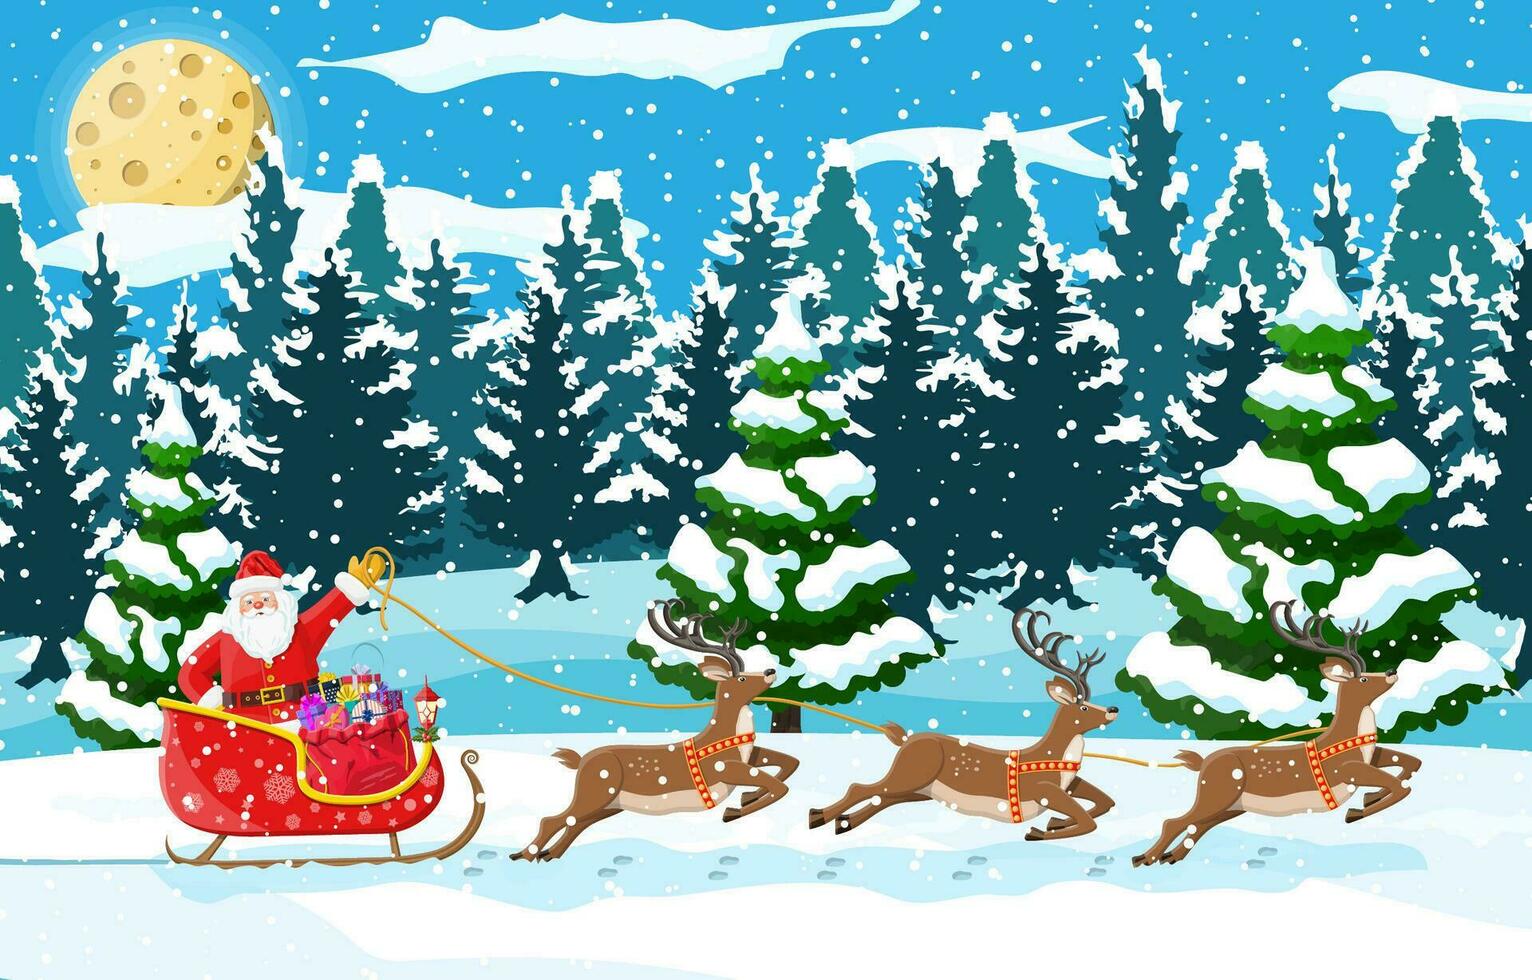 Christmas background. Santa claus rides reindeer sleigh. Winter landscape with fir trees forest and snowing. Happy new year celebration. New year xmas holiday. Vector illustration flat style